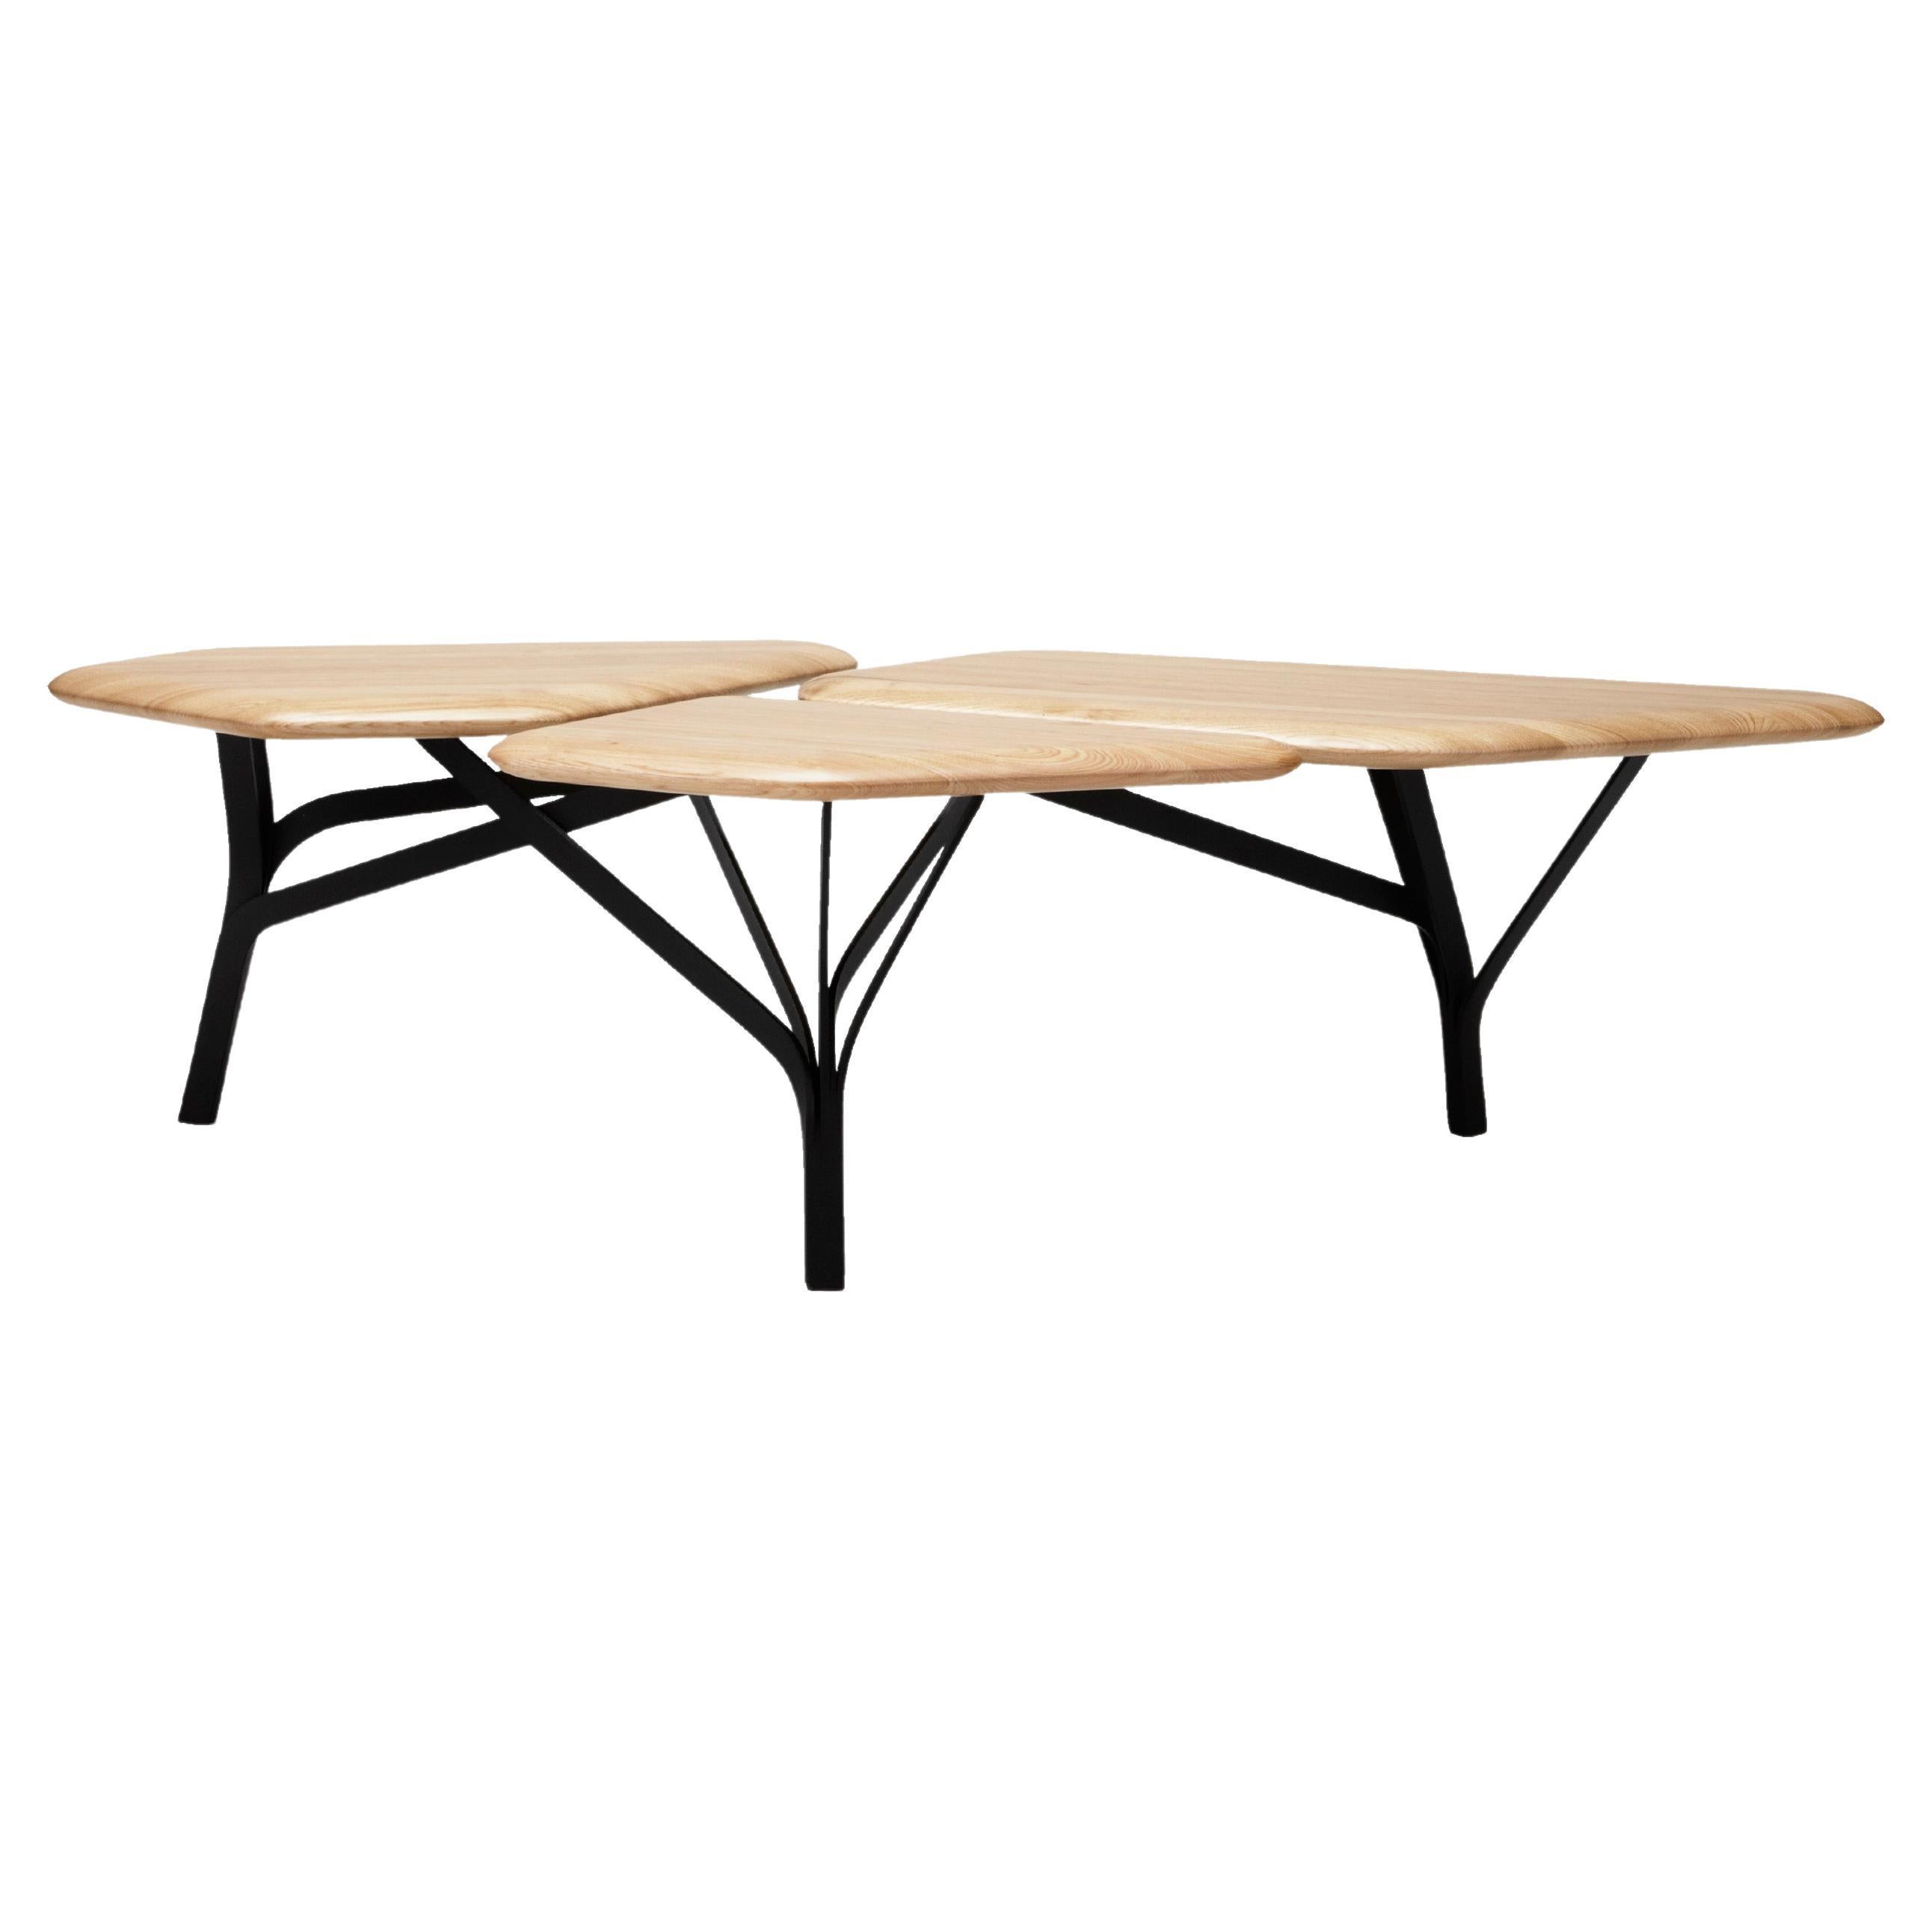 Borghese Coffee Table, Natural Wood Top by Noé Duchaufour Lawrance for La Chance For Sale